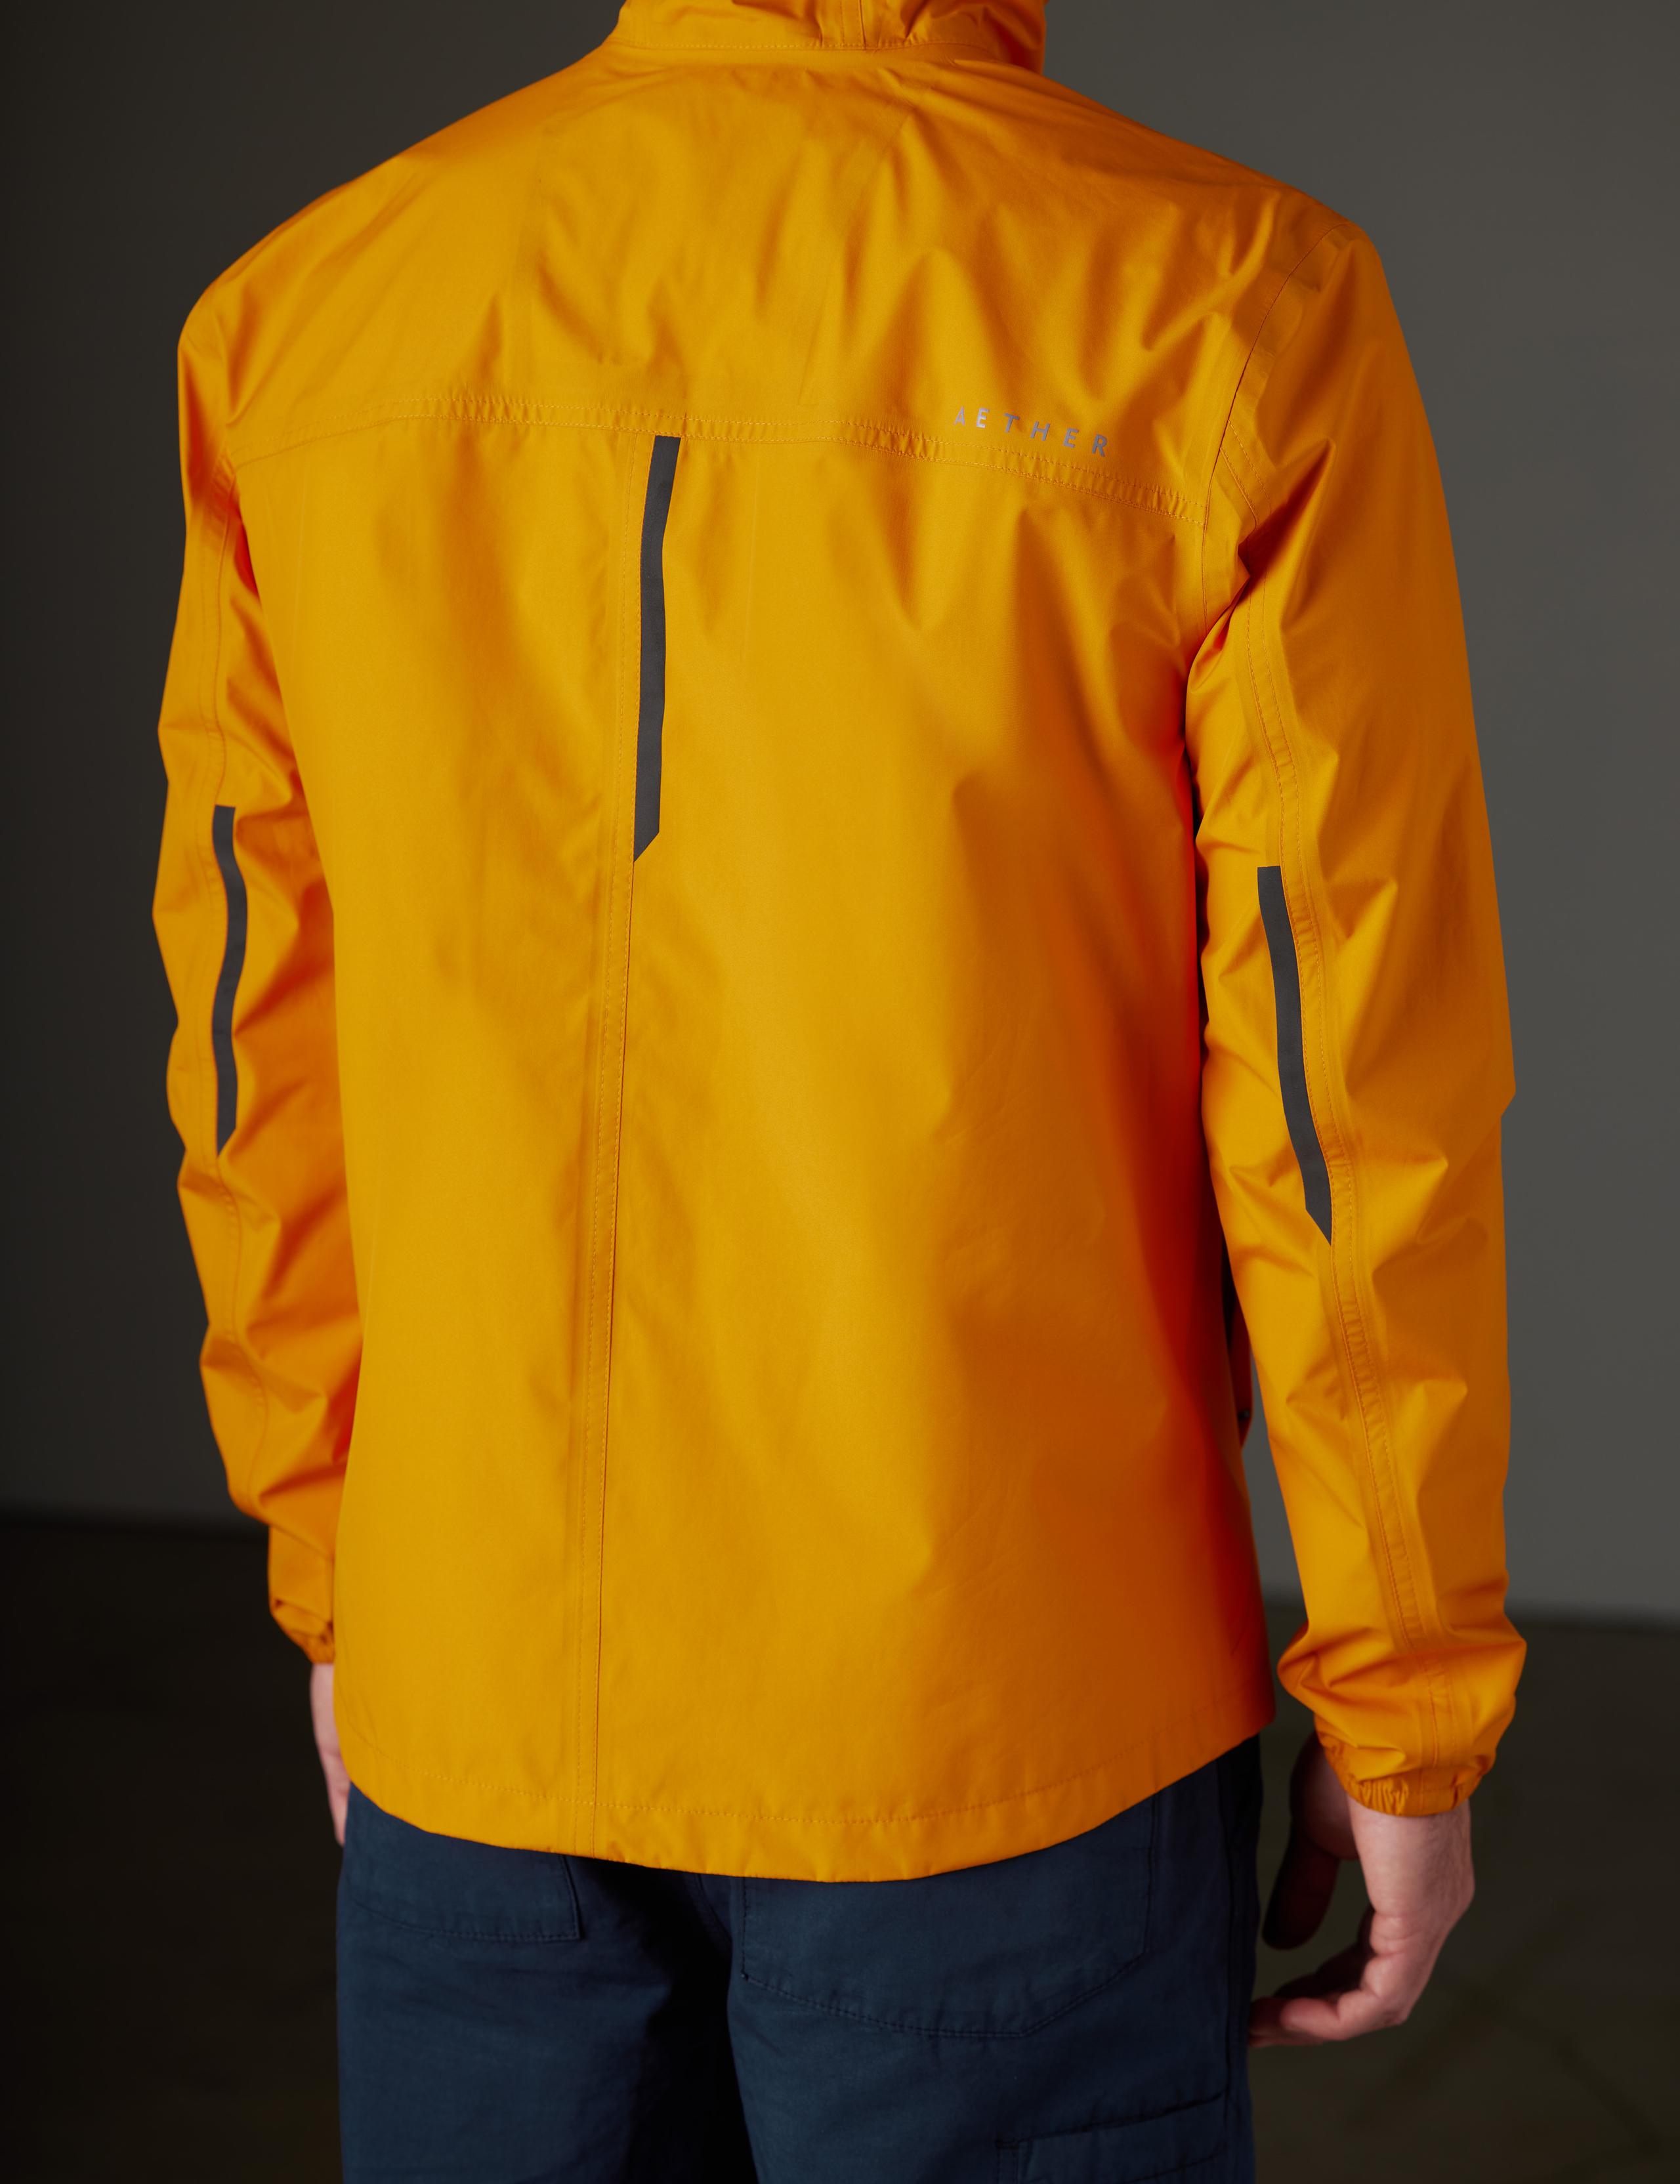 Rear view of the Storm All-Weather Jacket.